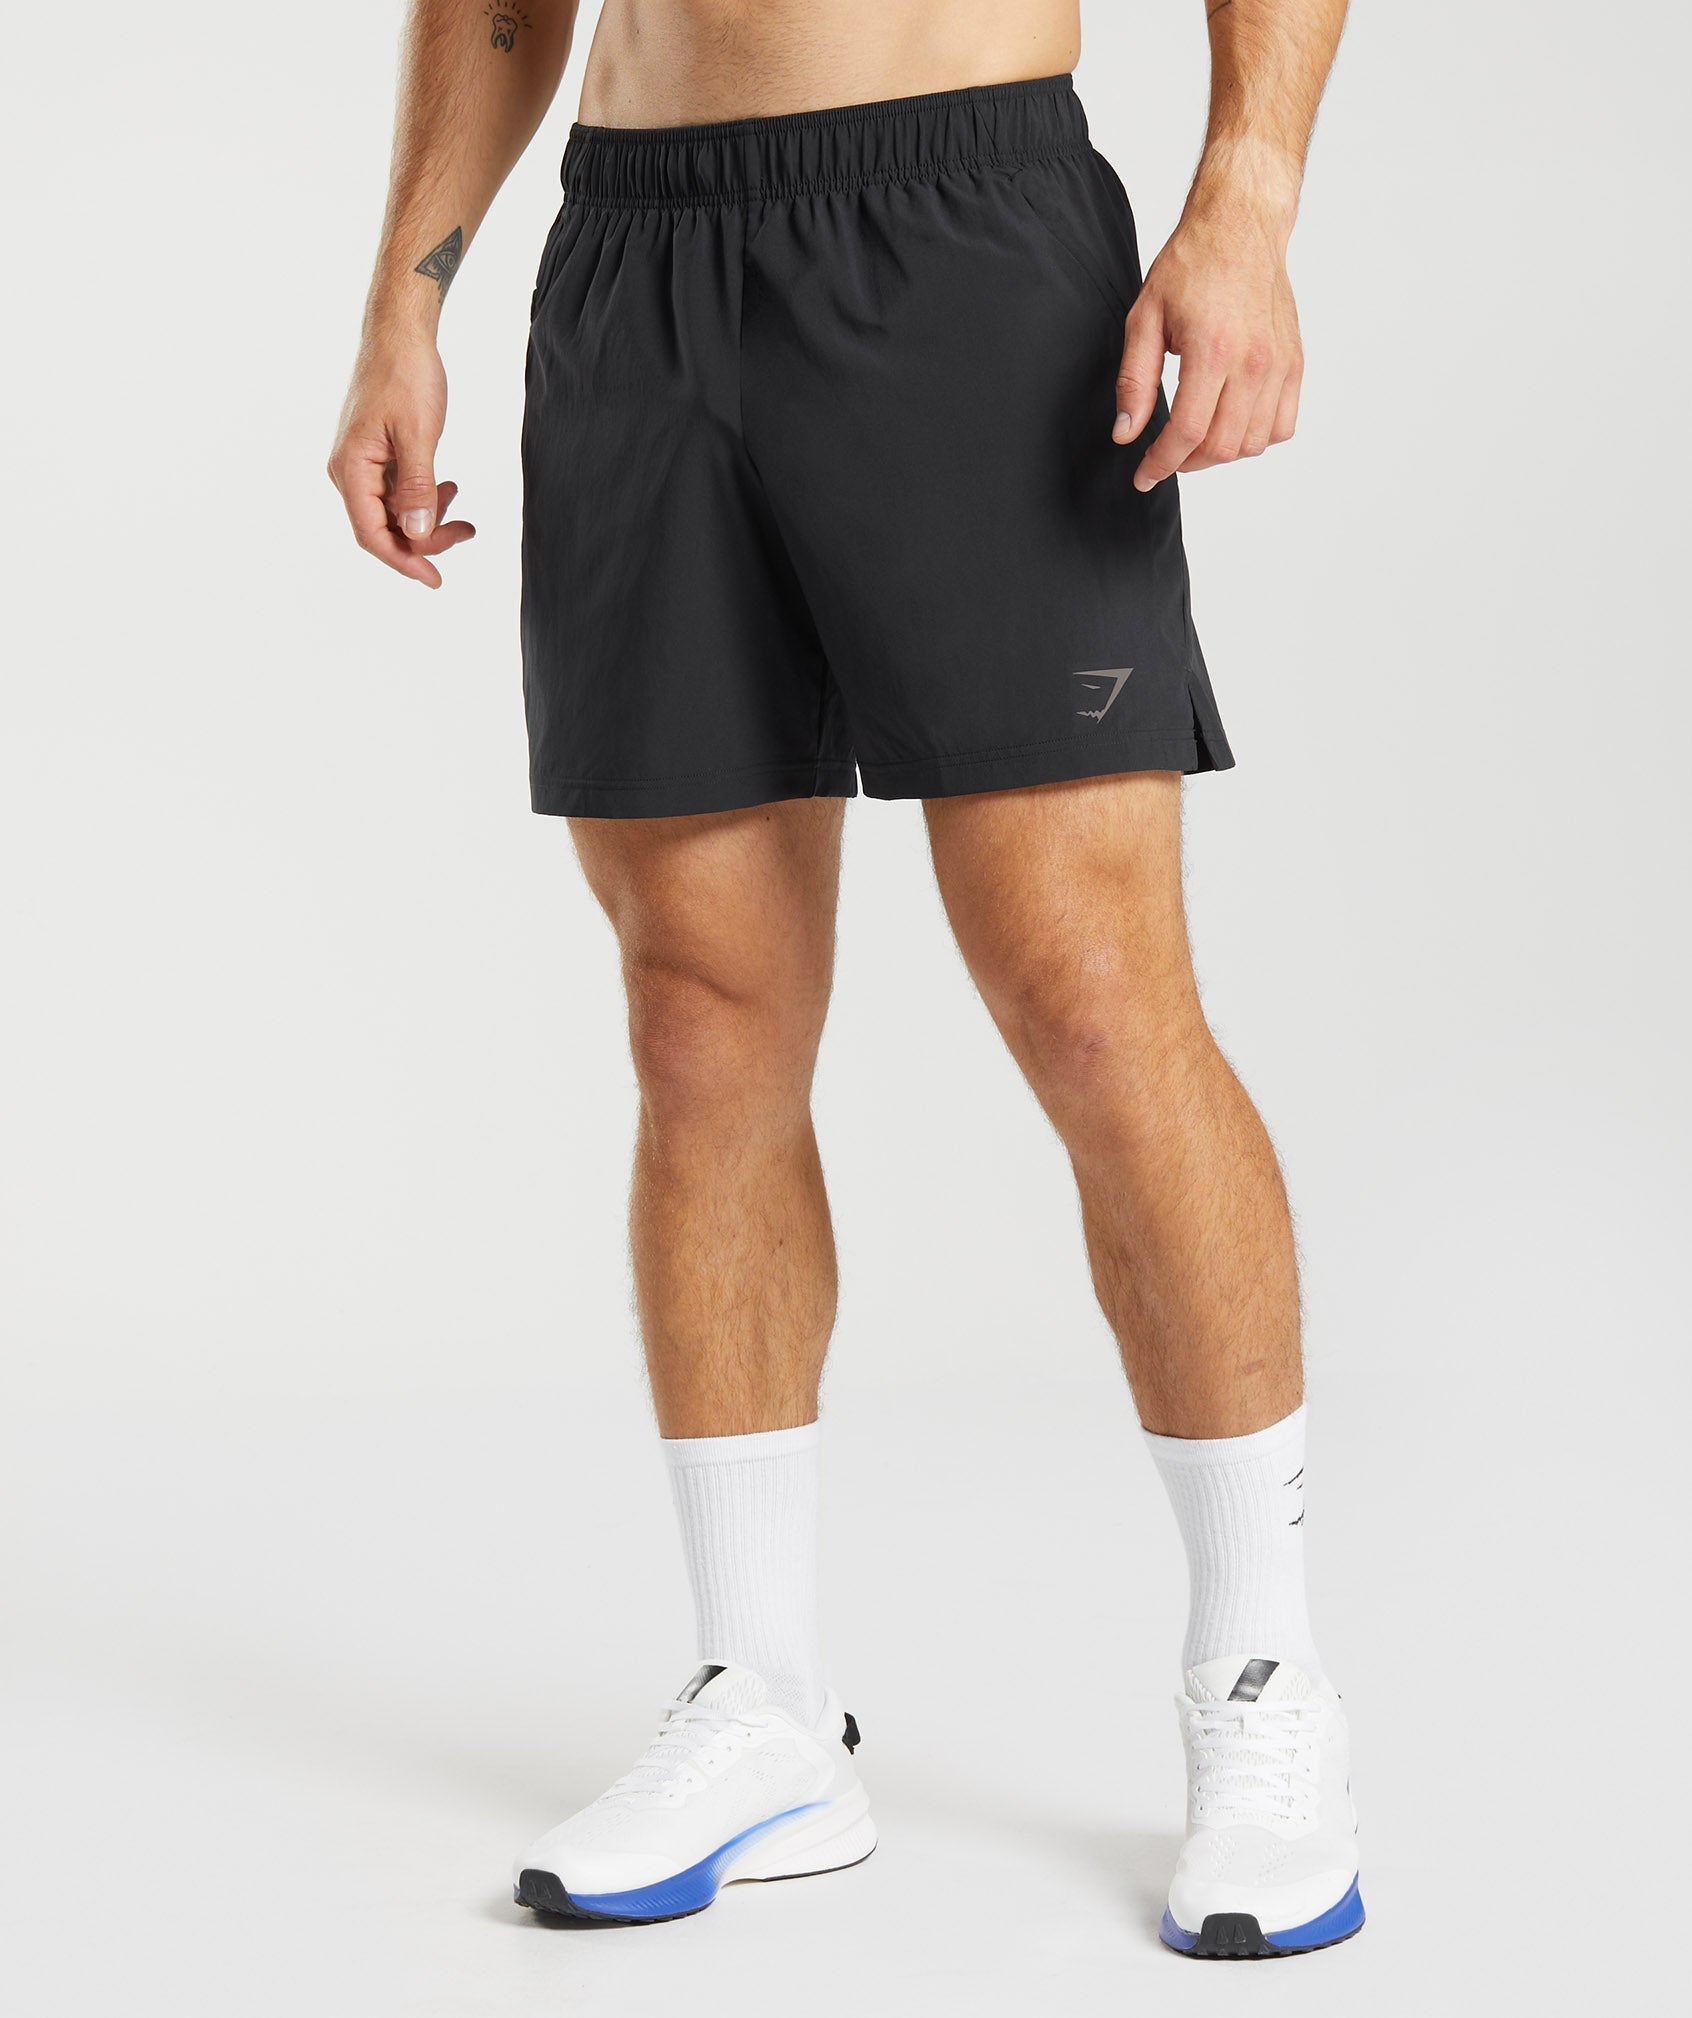 Trendsetting plain black sport shorts For Leisure And Fashion 